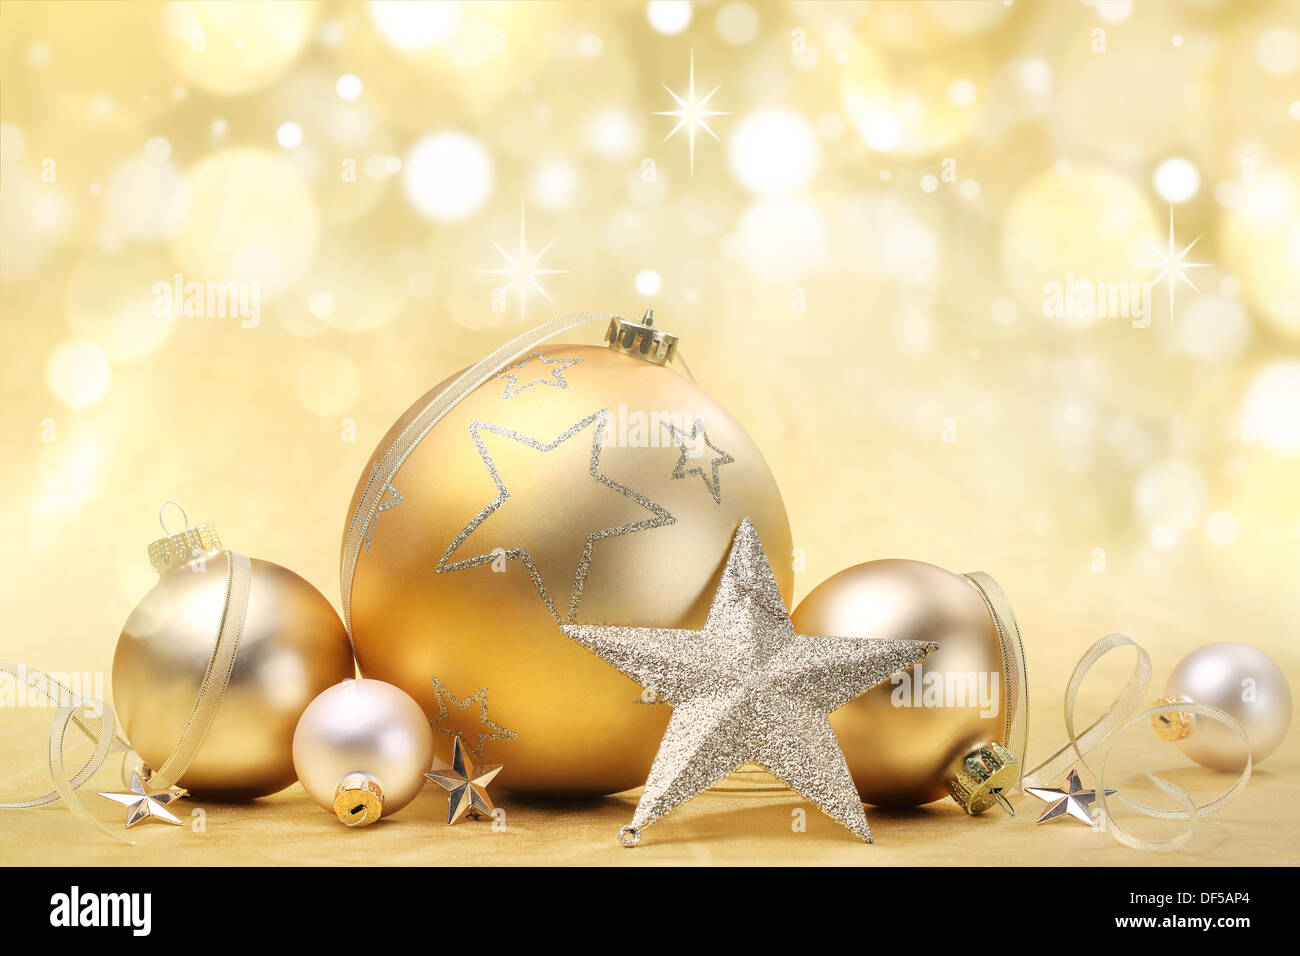 Christmas balls and star on abstract background Stock Photo